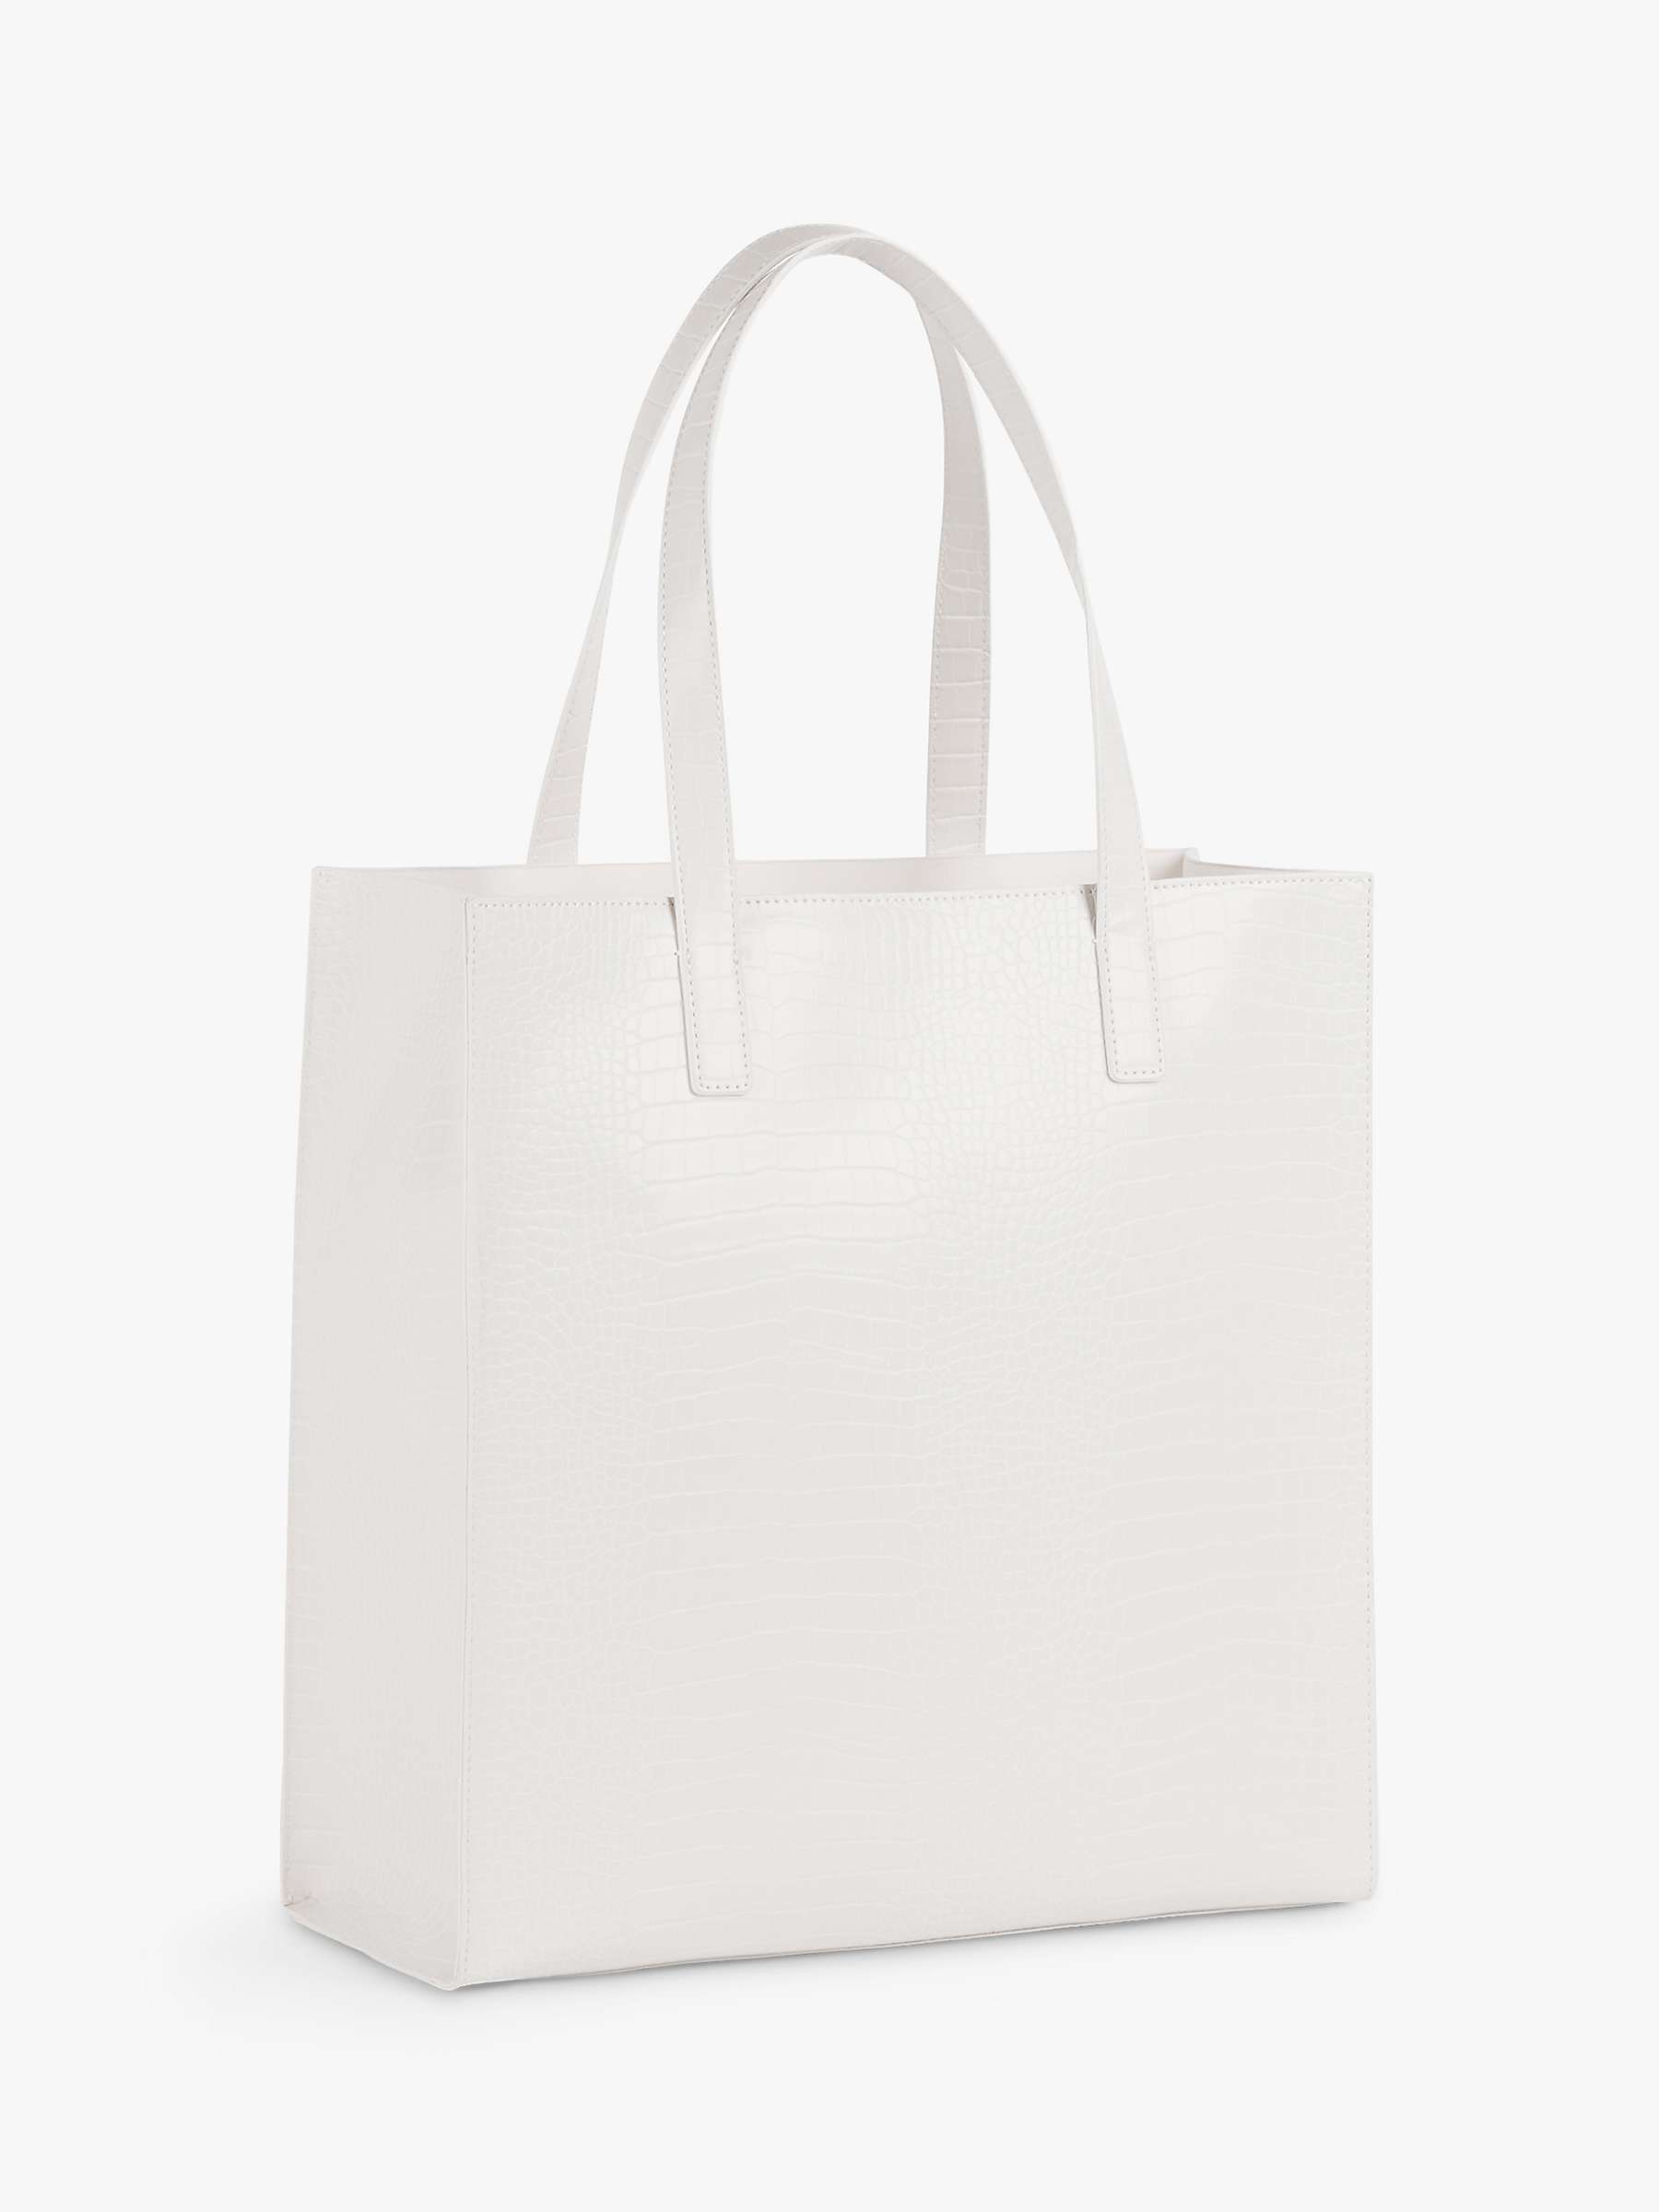 Ted Baker Croccon Large Icon Shopper Bag, White at John Lewis & Partners